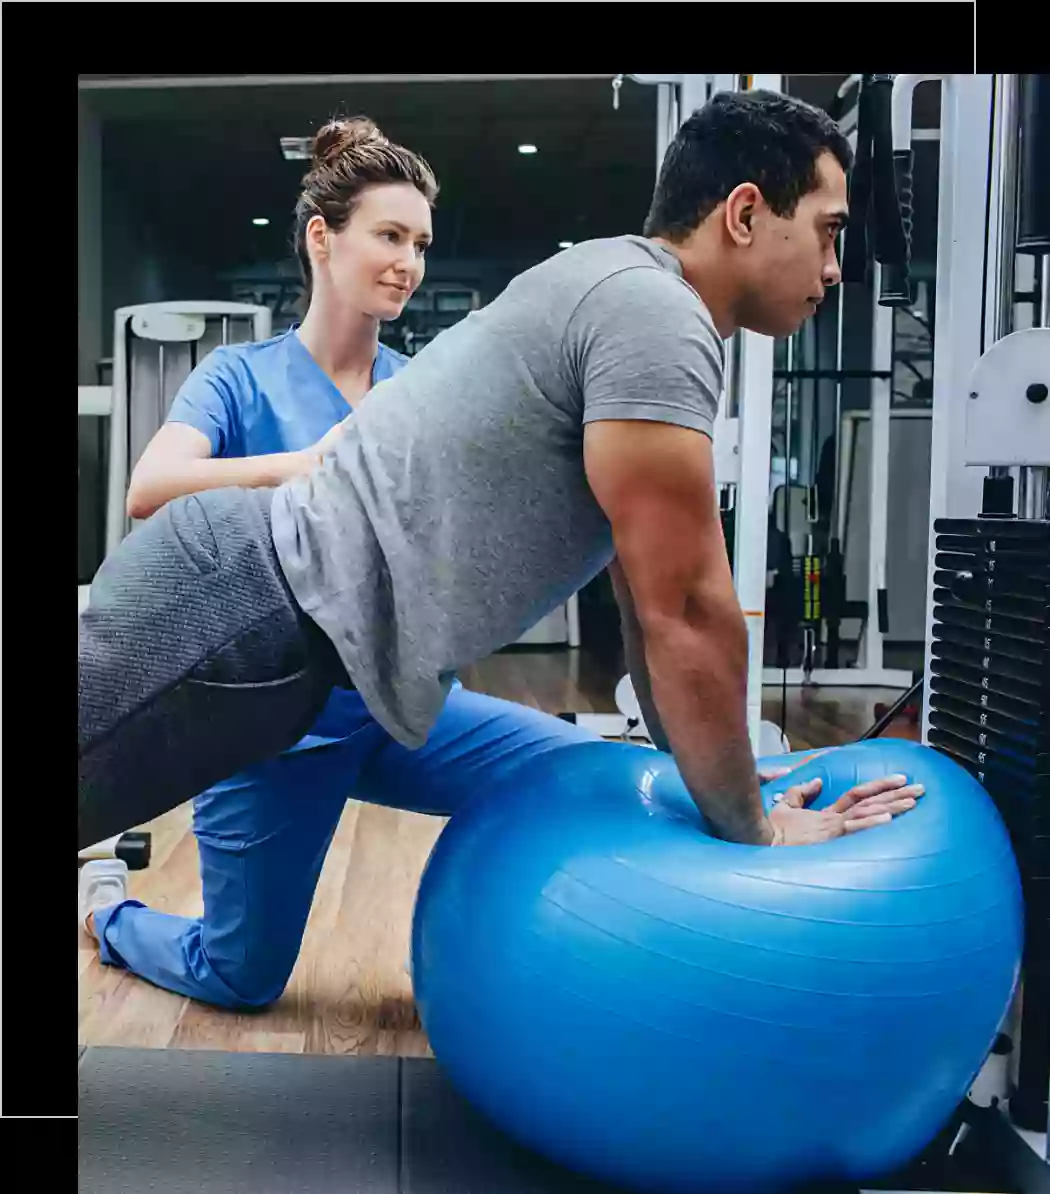 San Diego Sports Medicine Physical Therapy